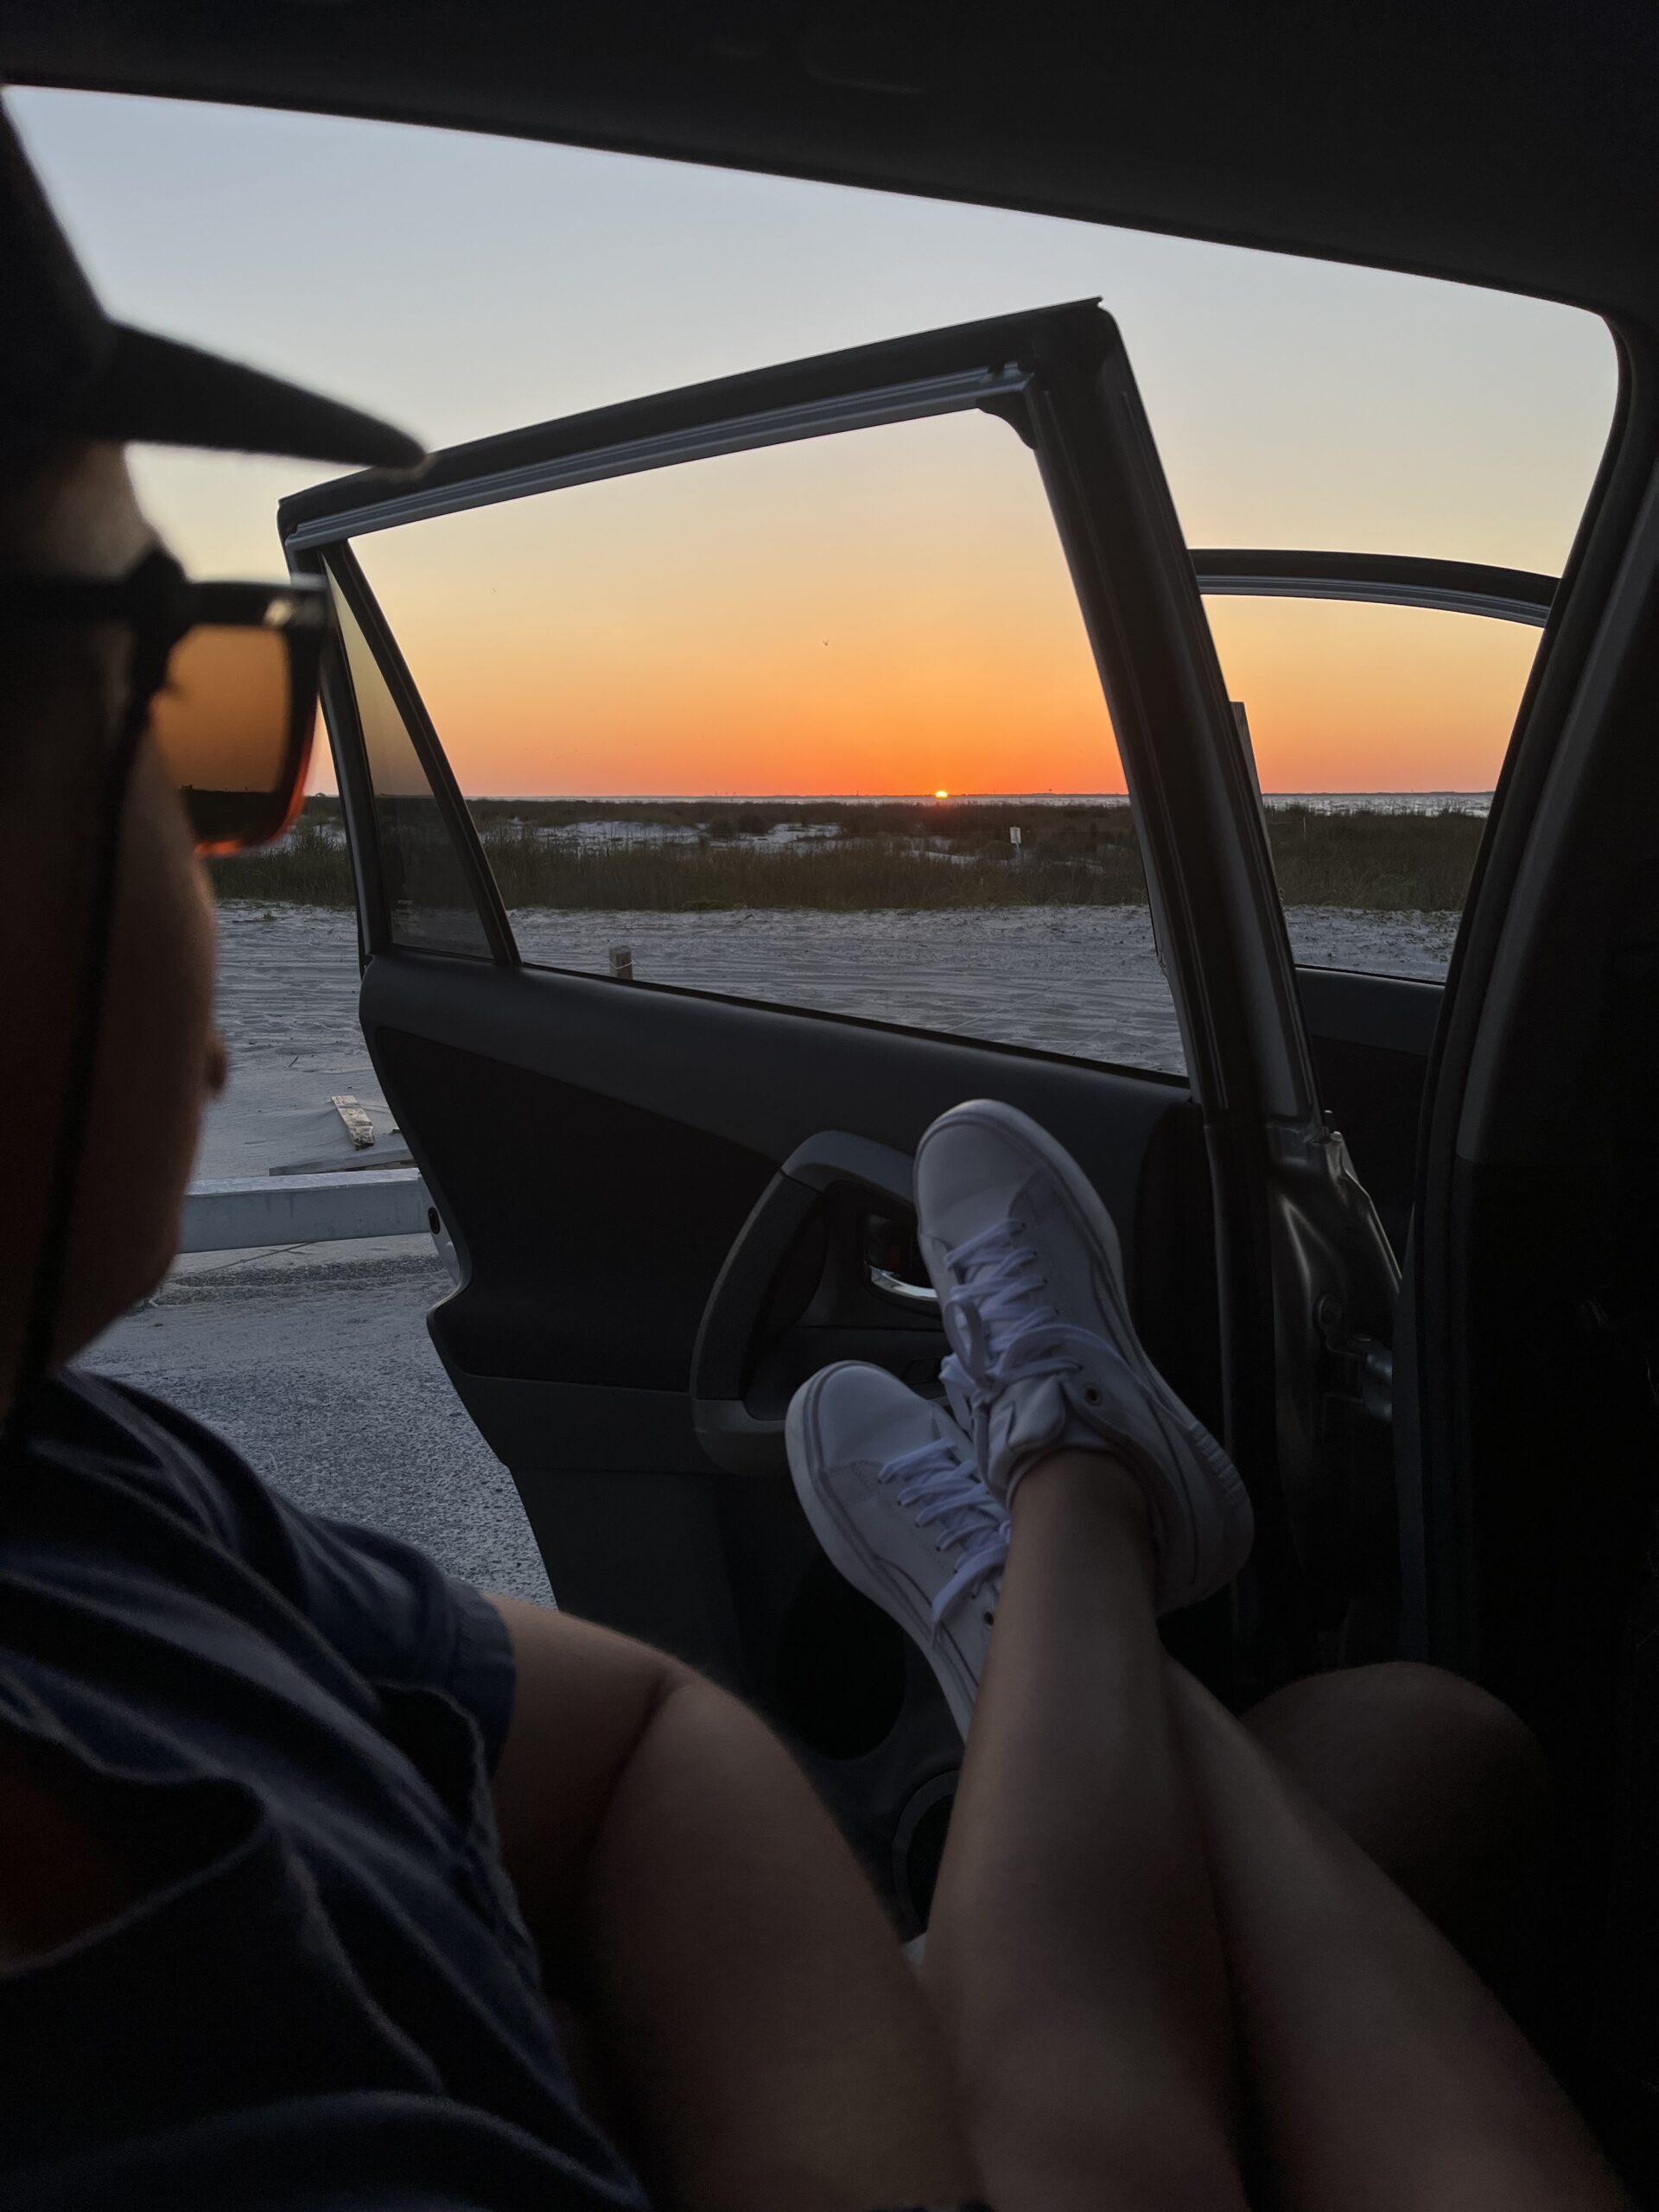 Two people watch the sunset over Fort Pickens on Pensacola Beach out of the backseat of a car